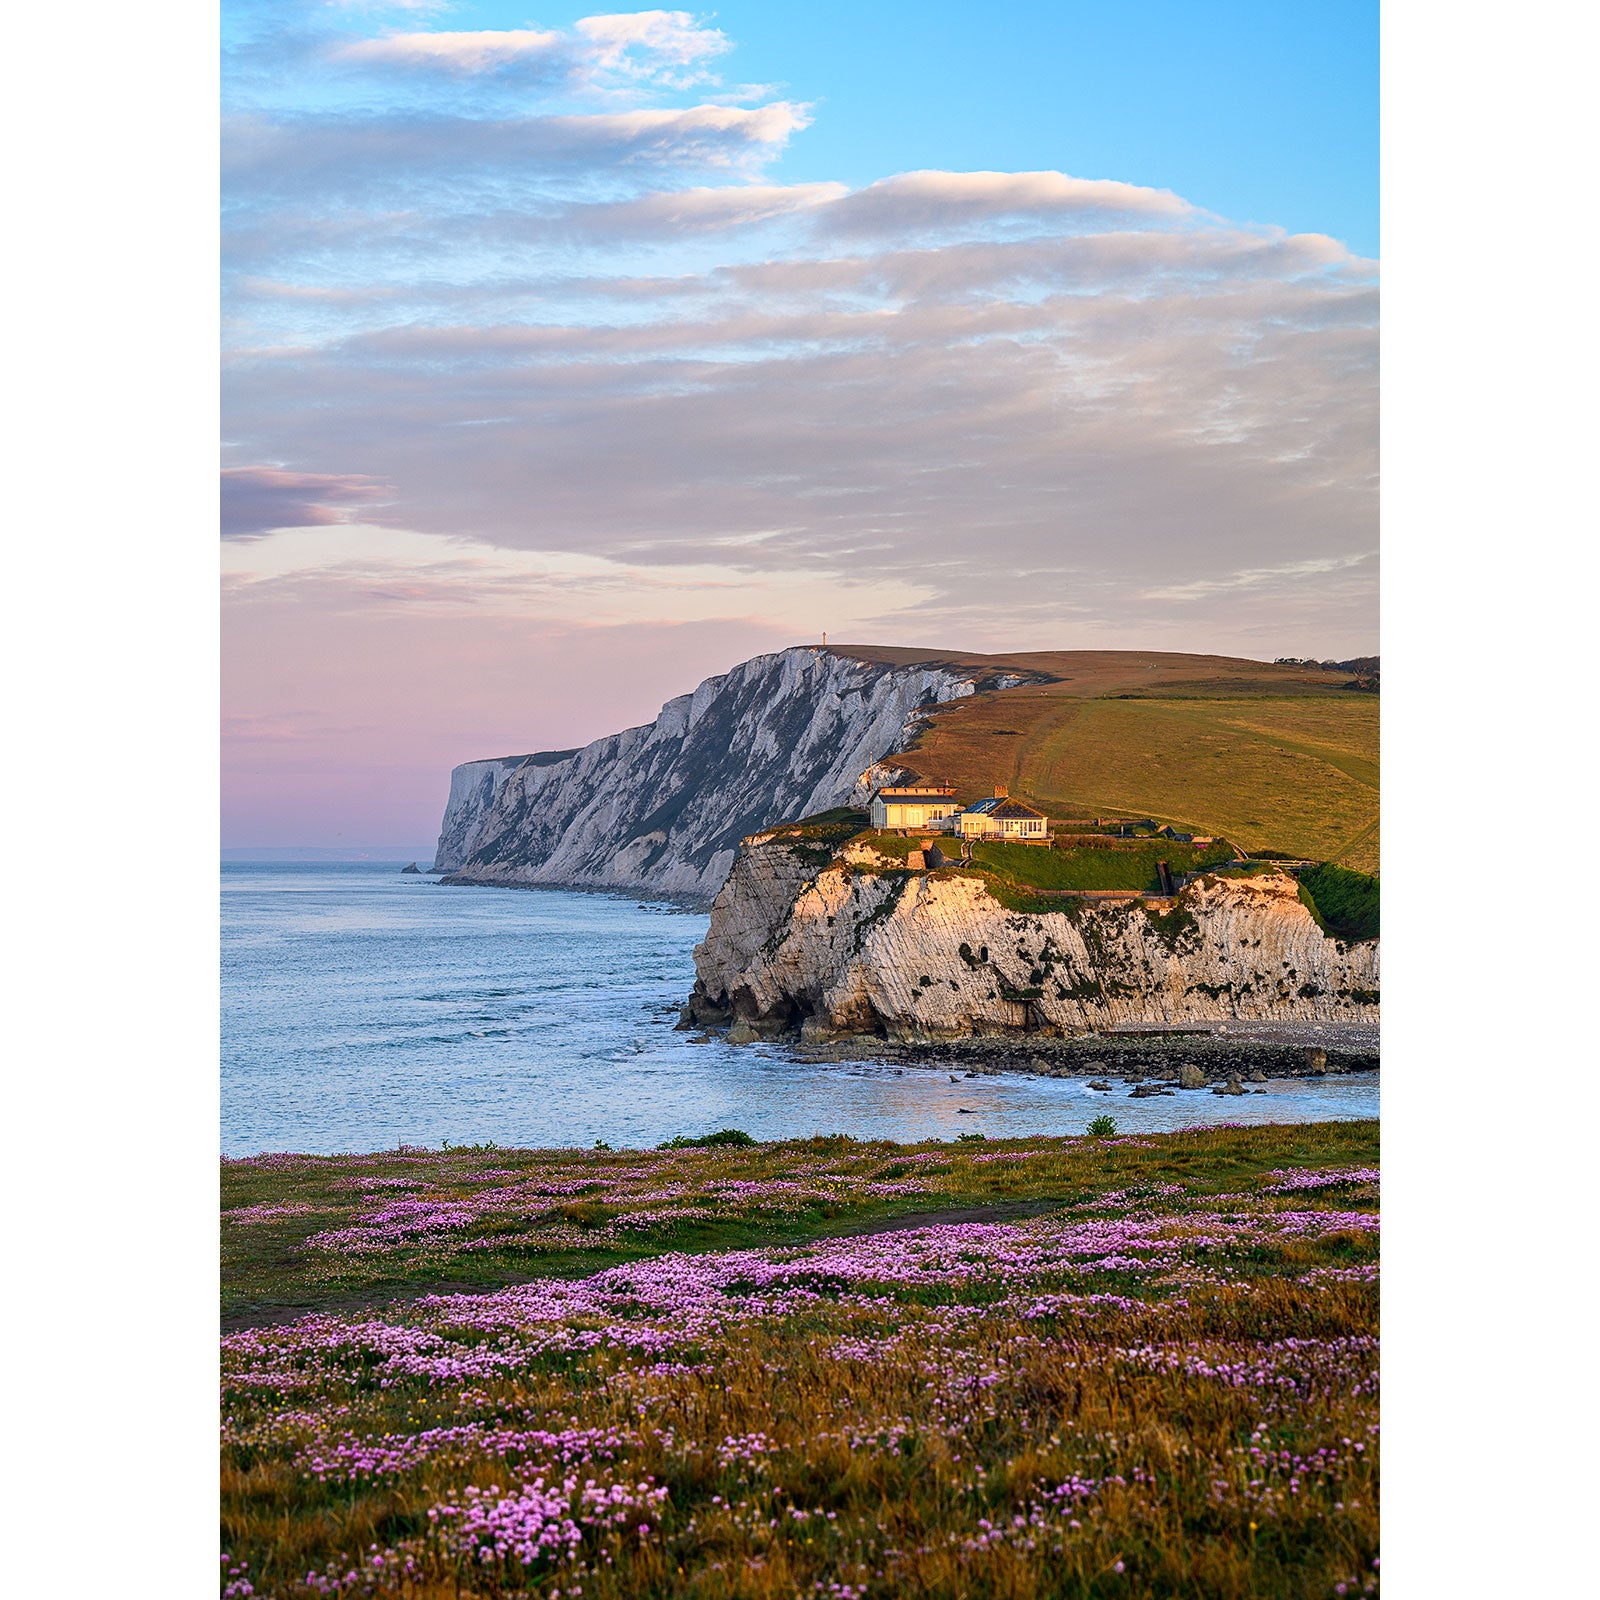 Coastal cliffs at sunset on Freshwater Bay on the Isle of Wight with a field of flowers in the foreground, captured by Available Light Photography.